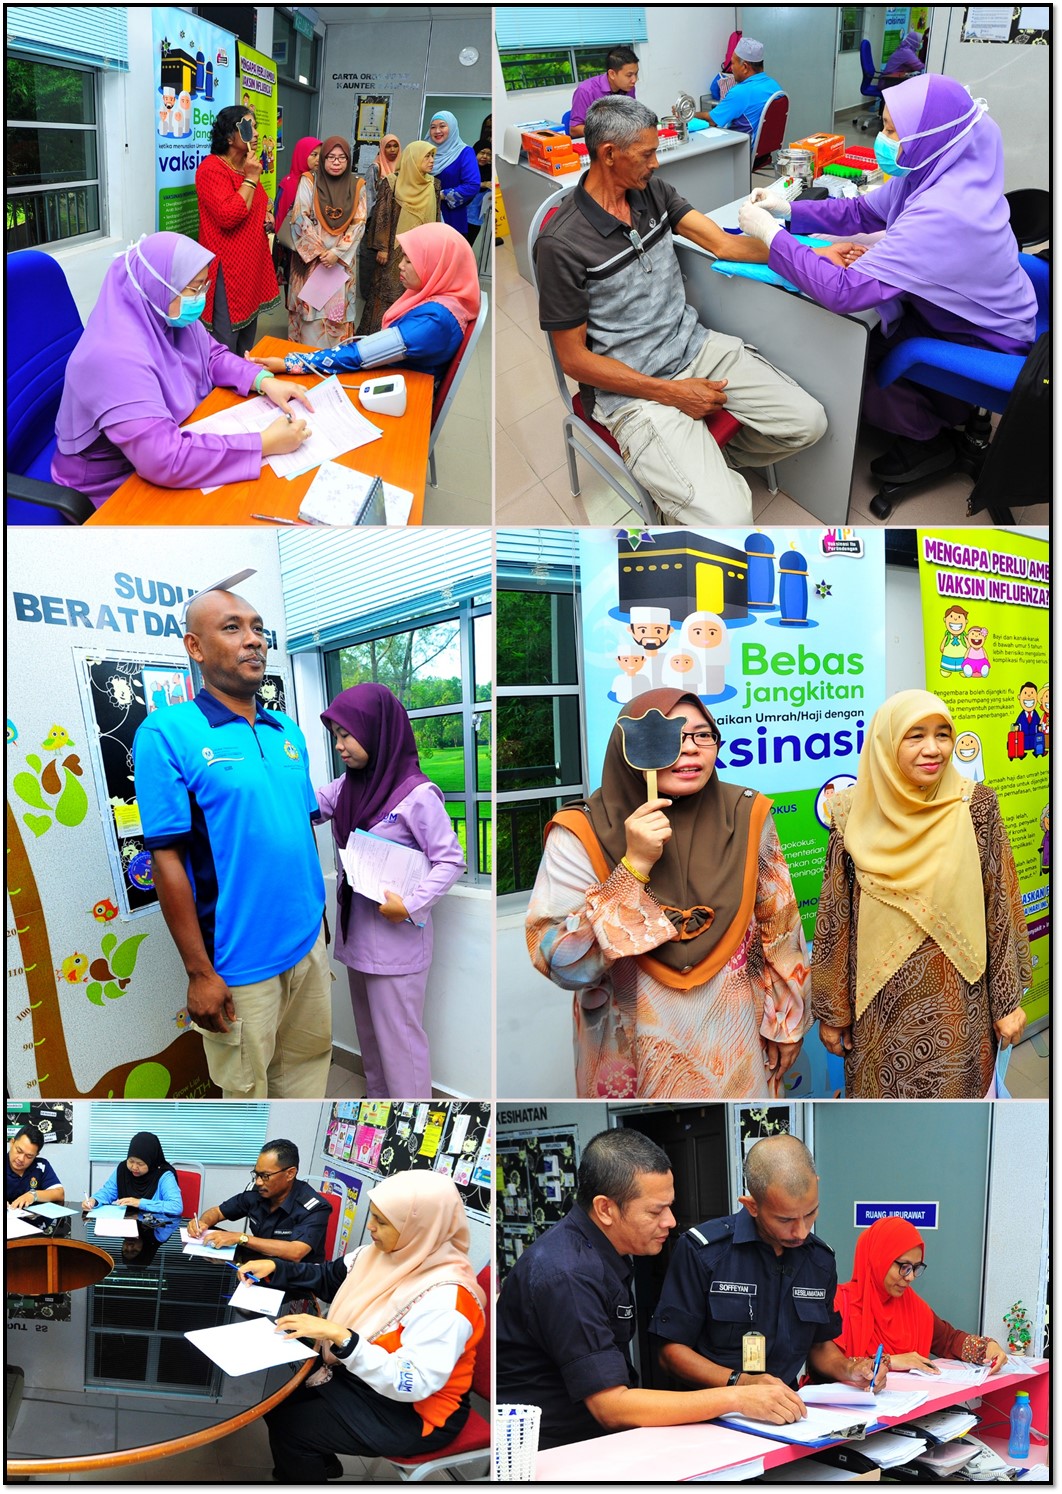 UUM HEALTH CHECK UP HELPS IMPROVE QUALITY OF WORK AMONG STAFF AND AVOID ANY UNTOWARD INCIDENCES